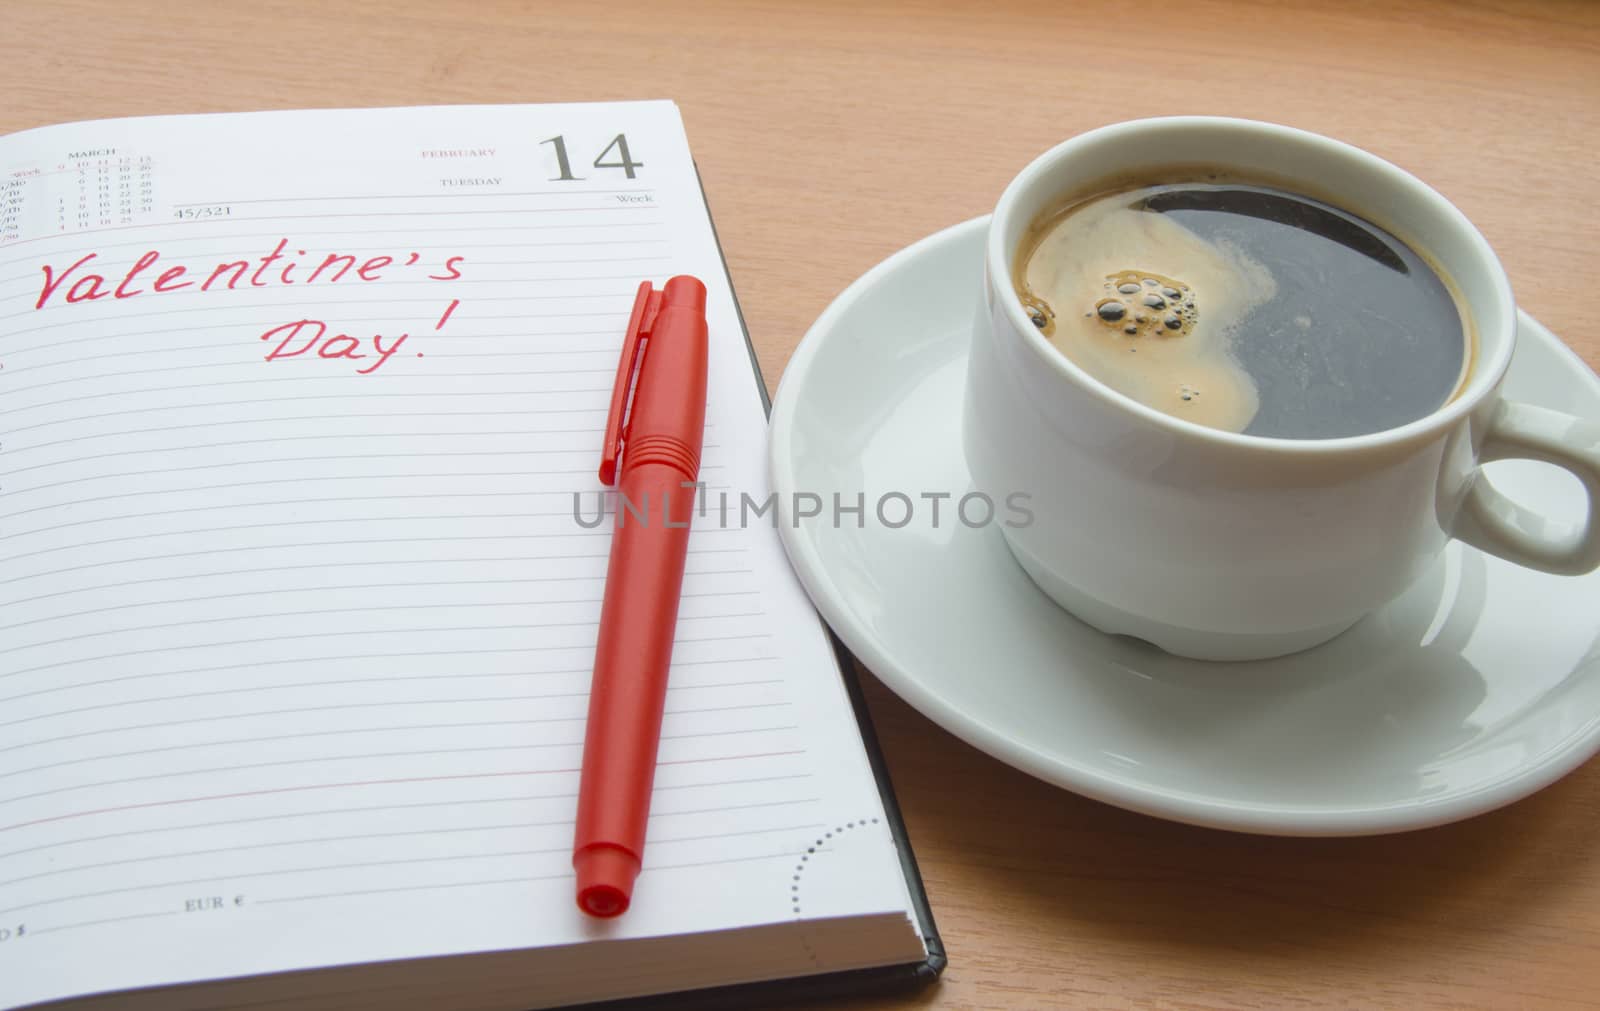 The concept of celebrating Valentine's Day, Cup coffee, diaries by claire_lucia